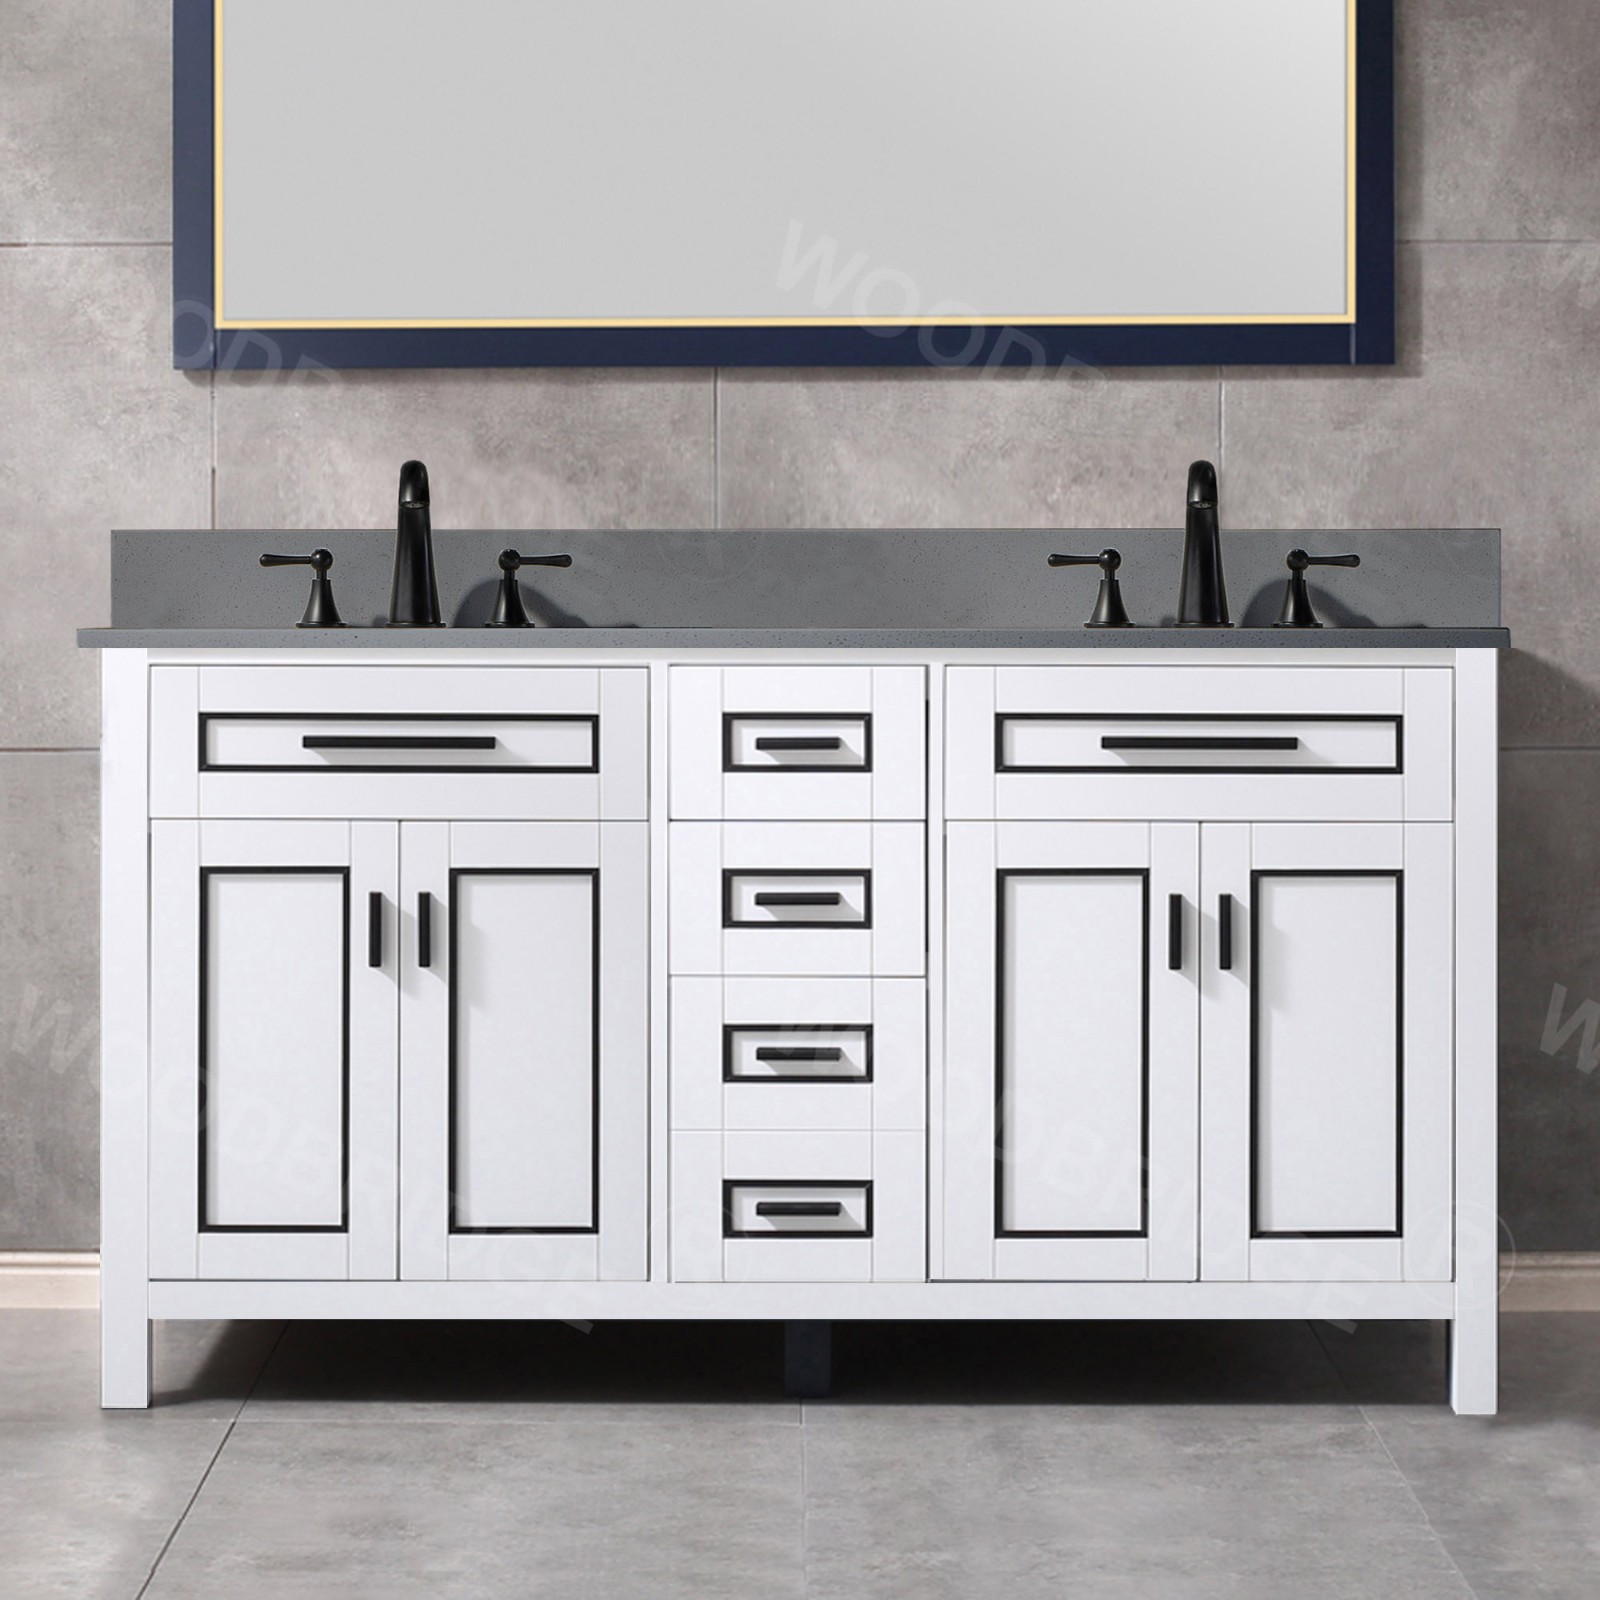  WOODBRIDGE Milan  61” Floor Mounted Single Basin Vanity Set with Solid Wood Cabinet in White and Engineered stone composite Vanity Top in Dark Gray with Pre-installed Undermount Rectangle Bathroom Sink in White and Pre-Drilled 3-Hole for 8” Widespread Fau_4602